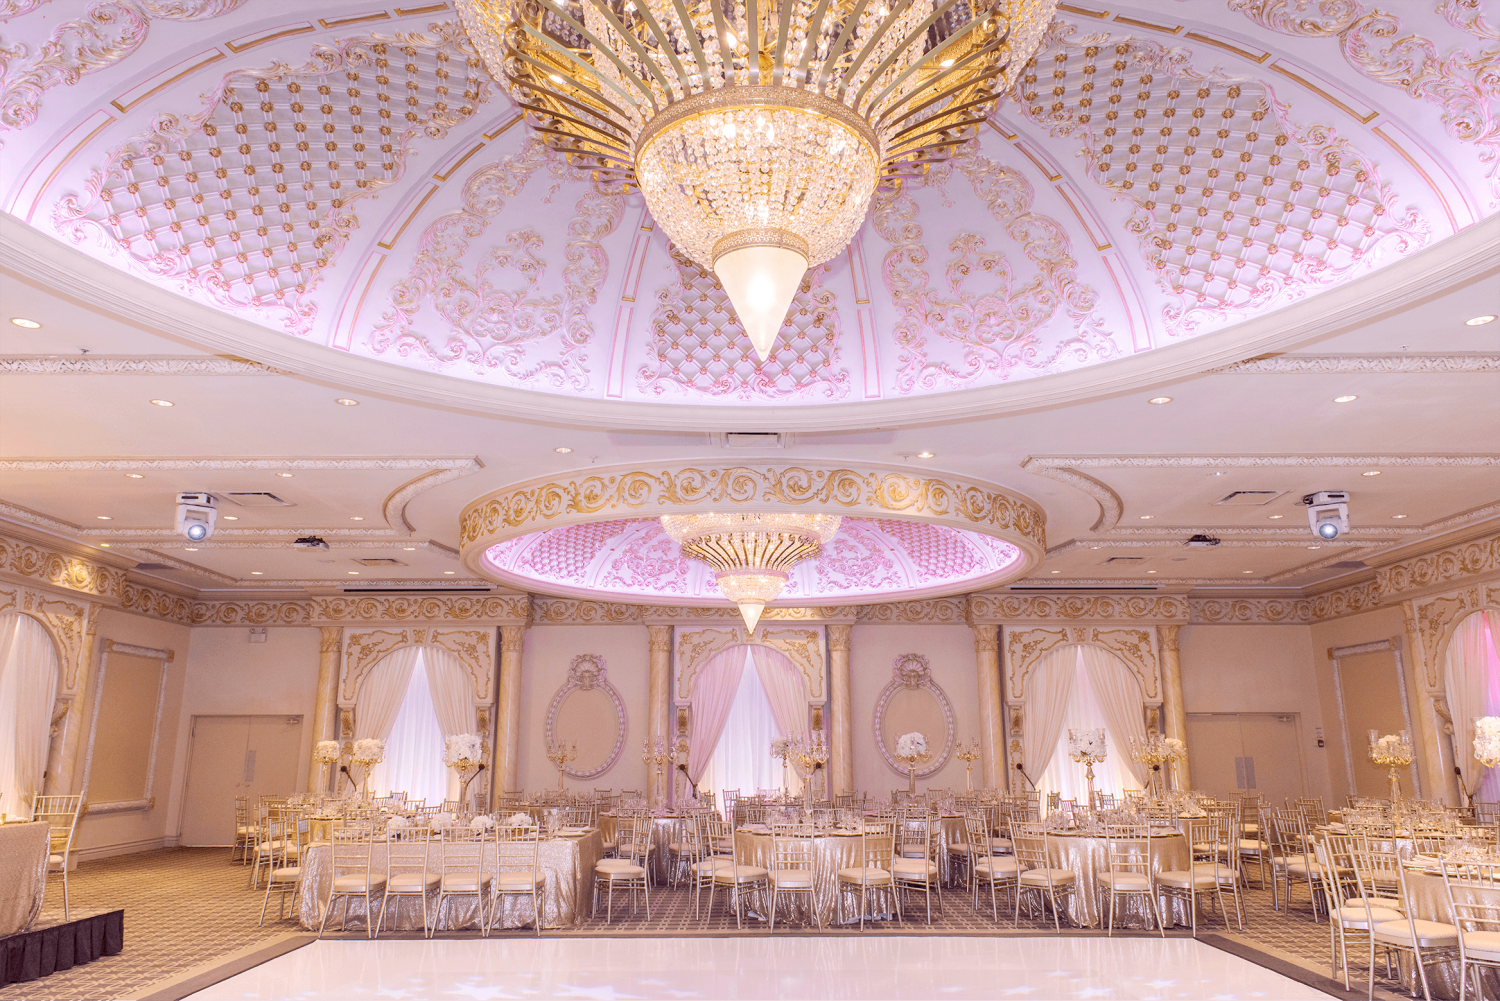 The Classic Ballroom venue at Paradise Banquet Halls with a dance floor below three large chandeliers.